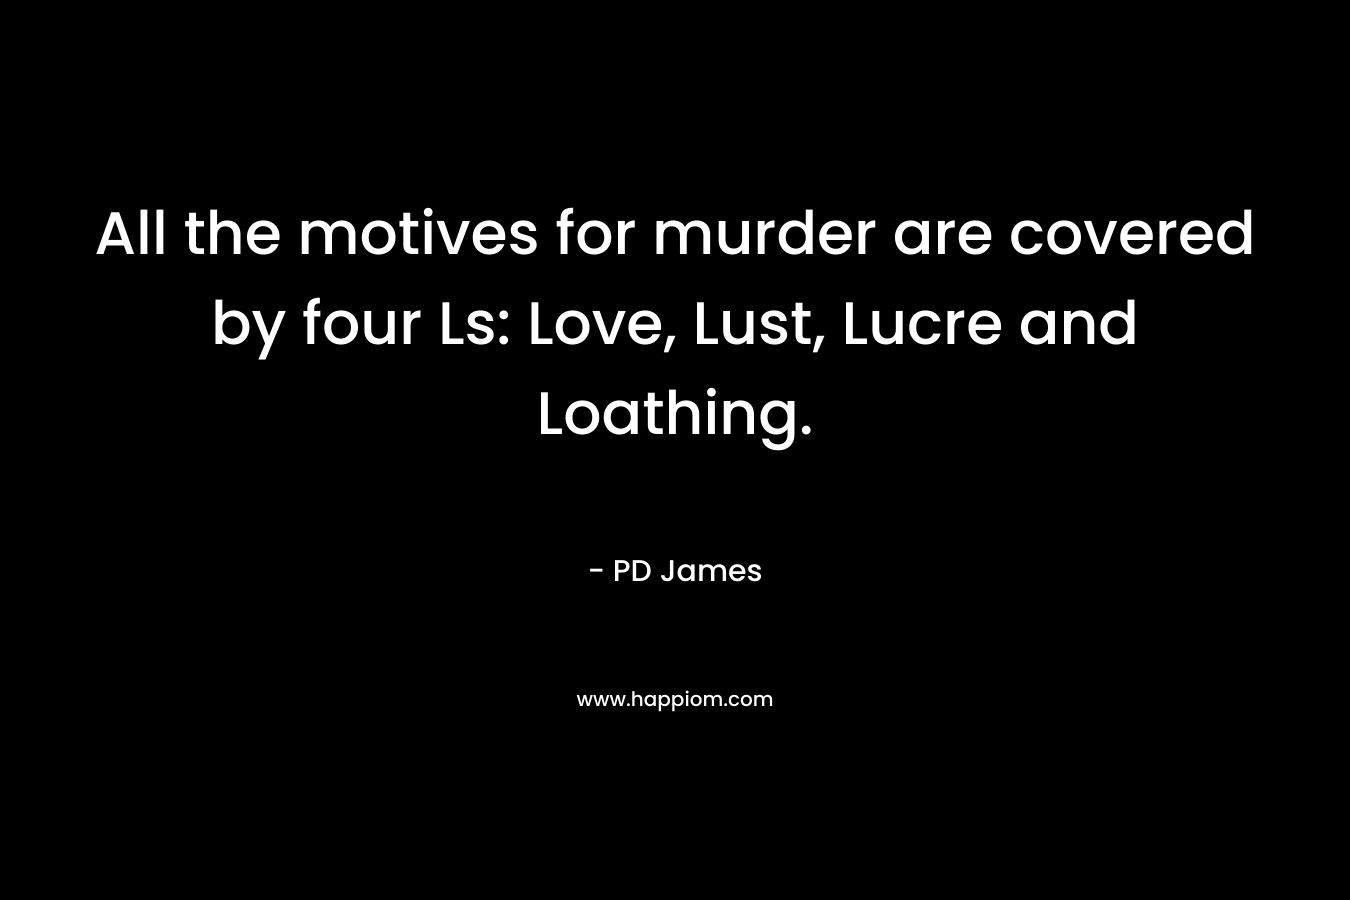 All the motives for murder are covered by four Ls: Love, Lust, Lucre and Loathing. – PD James